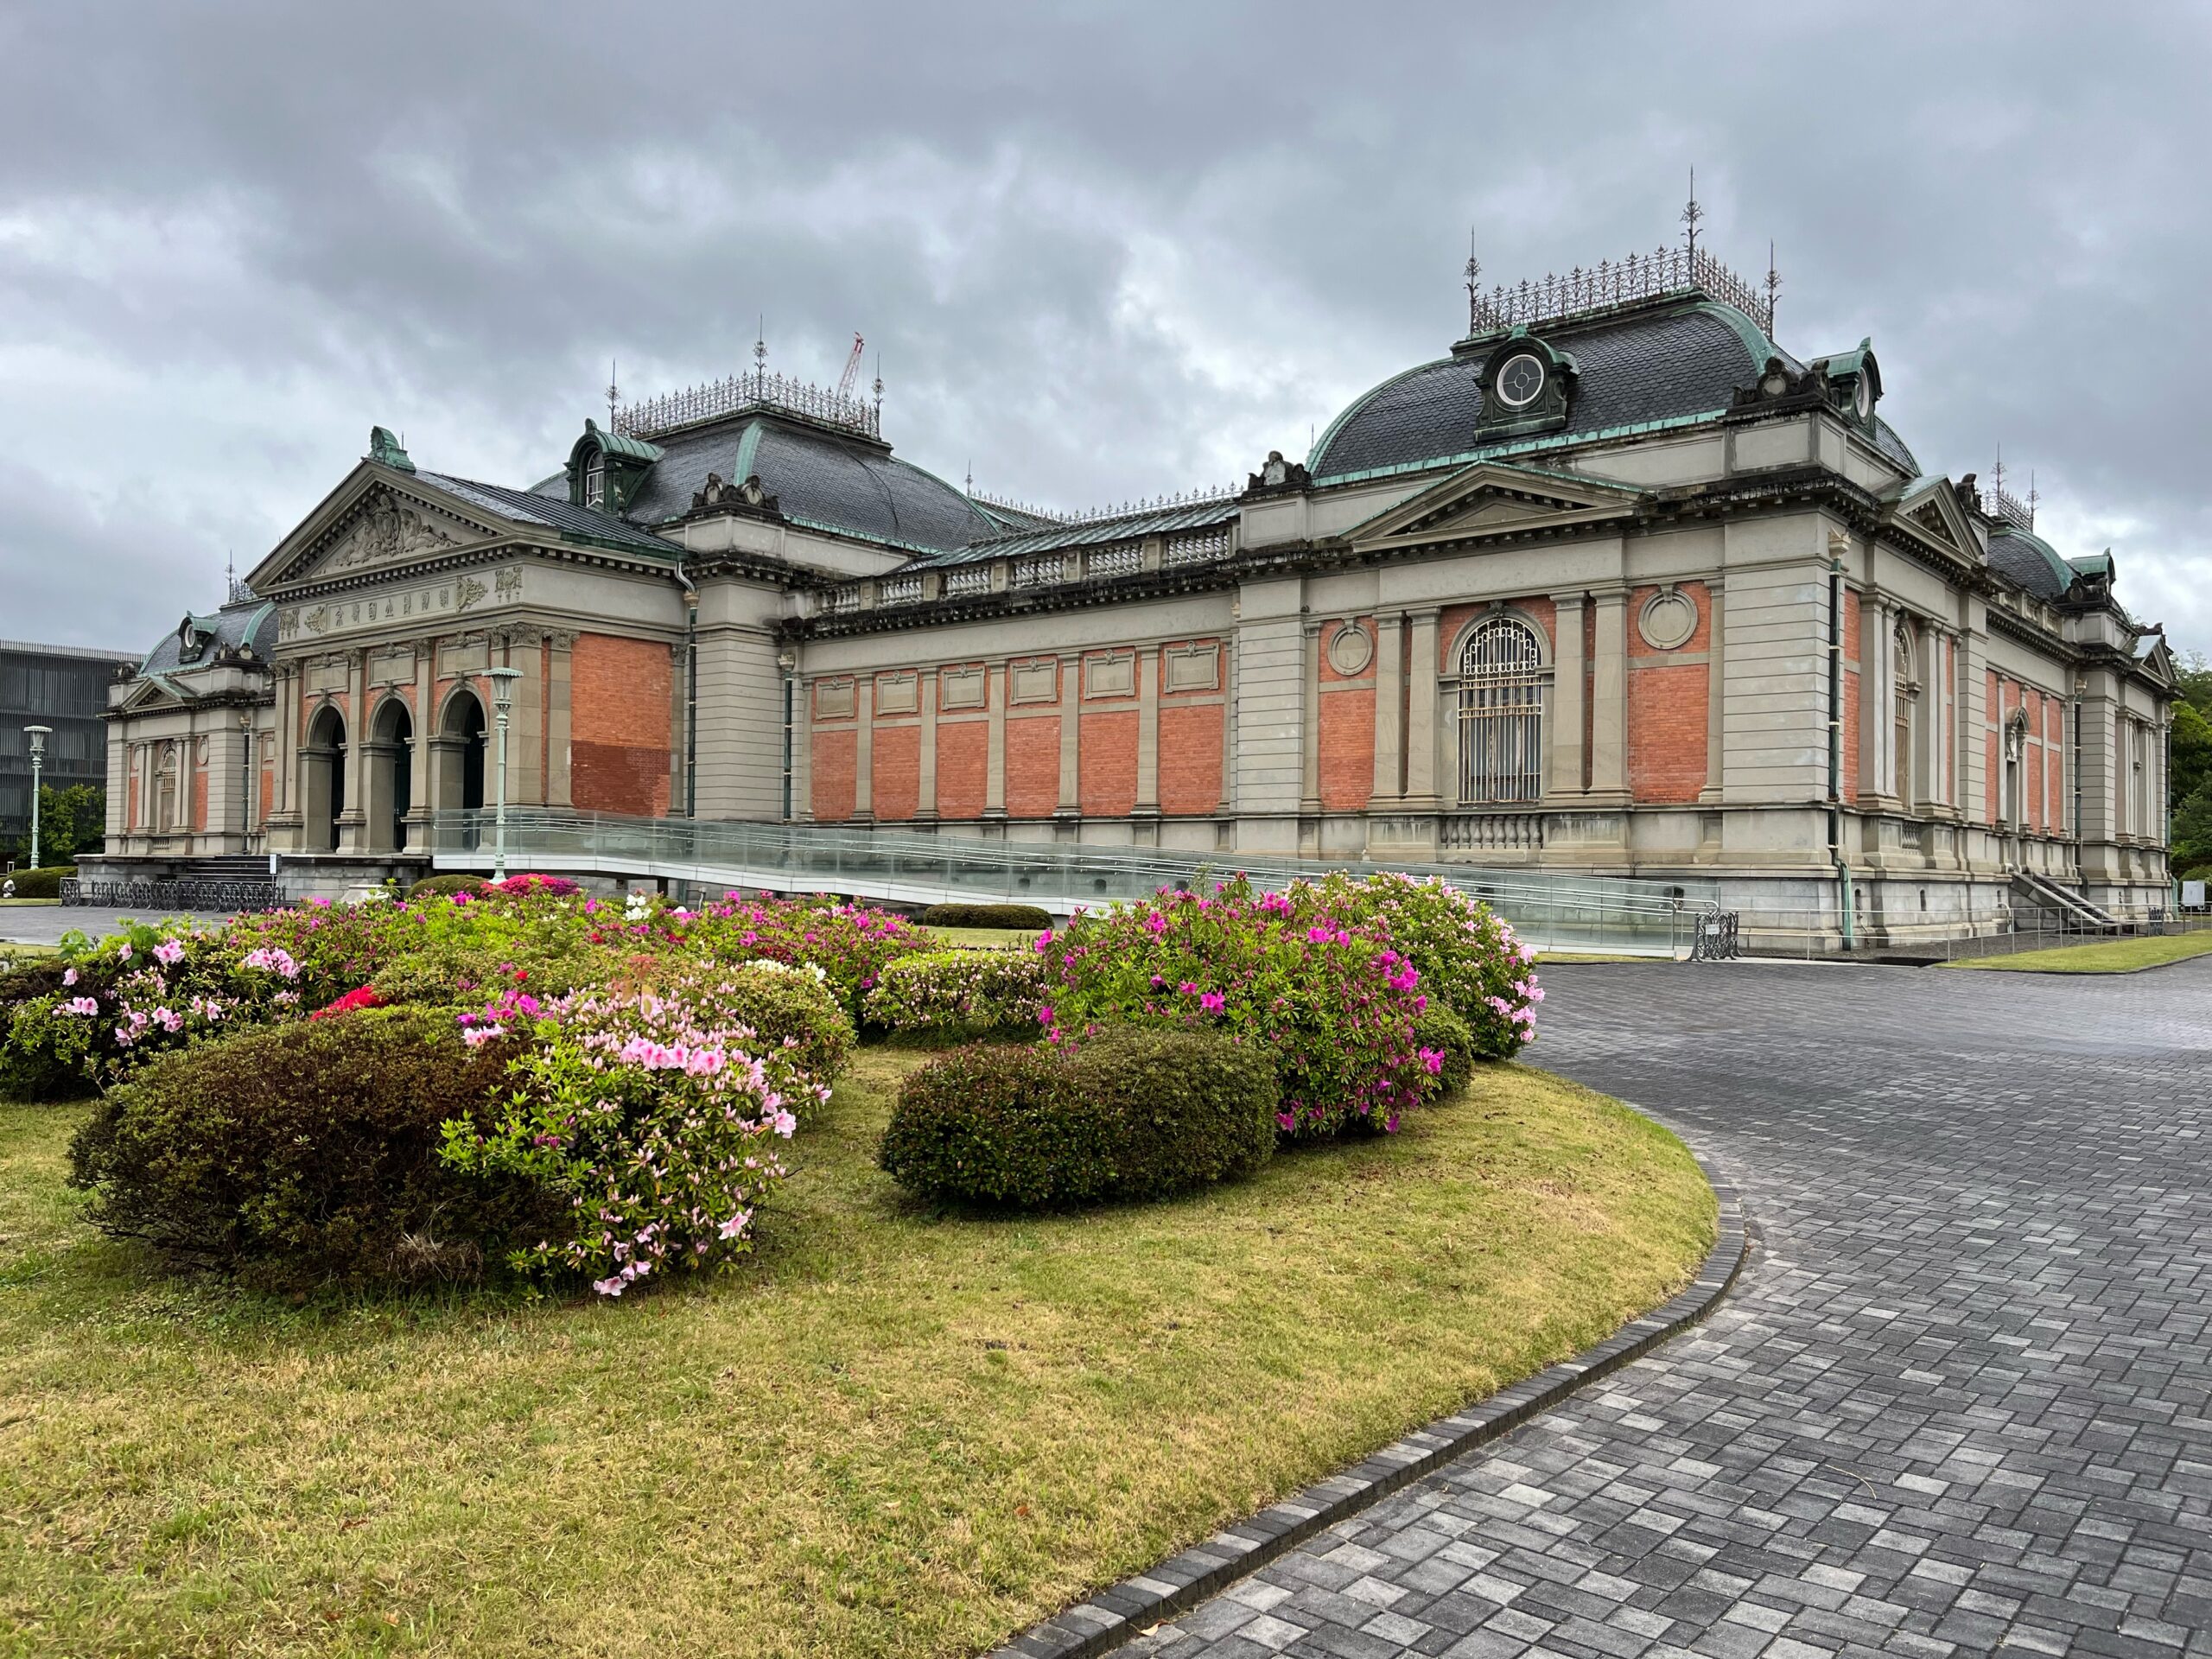 The Kyoto National Museum is a brick and stone building with a green copper roof and ornate railed look outs.